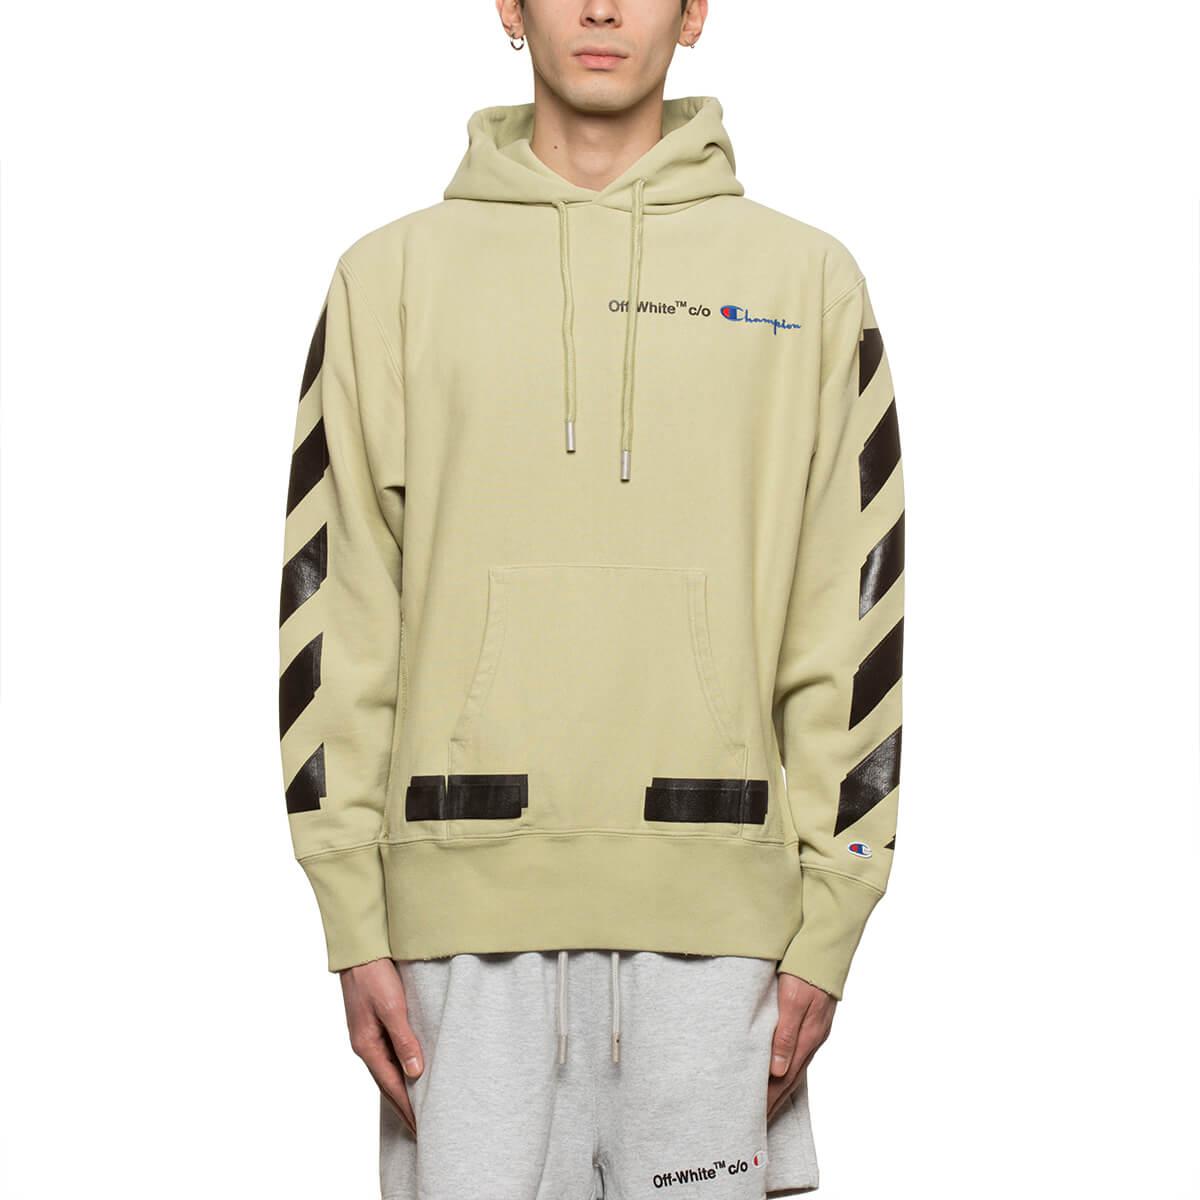 off white co champion hoodie